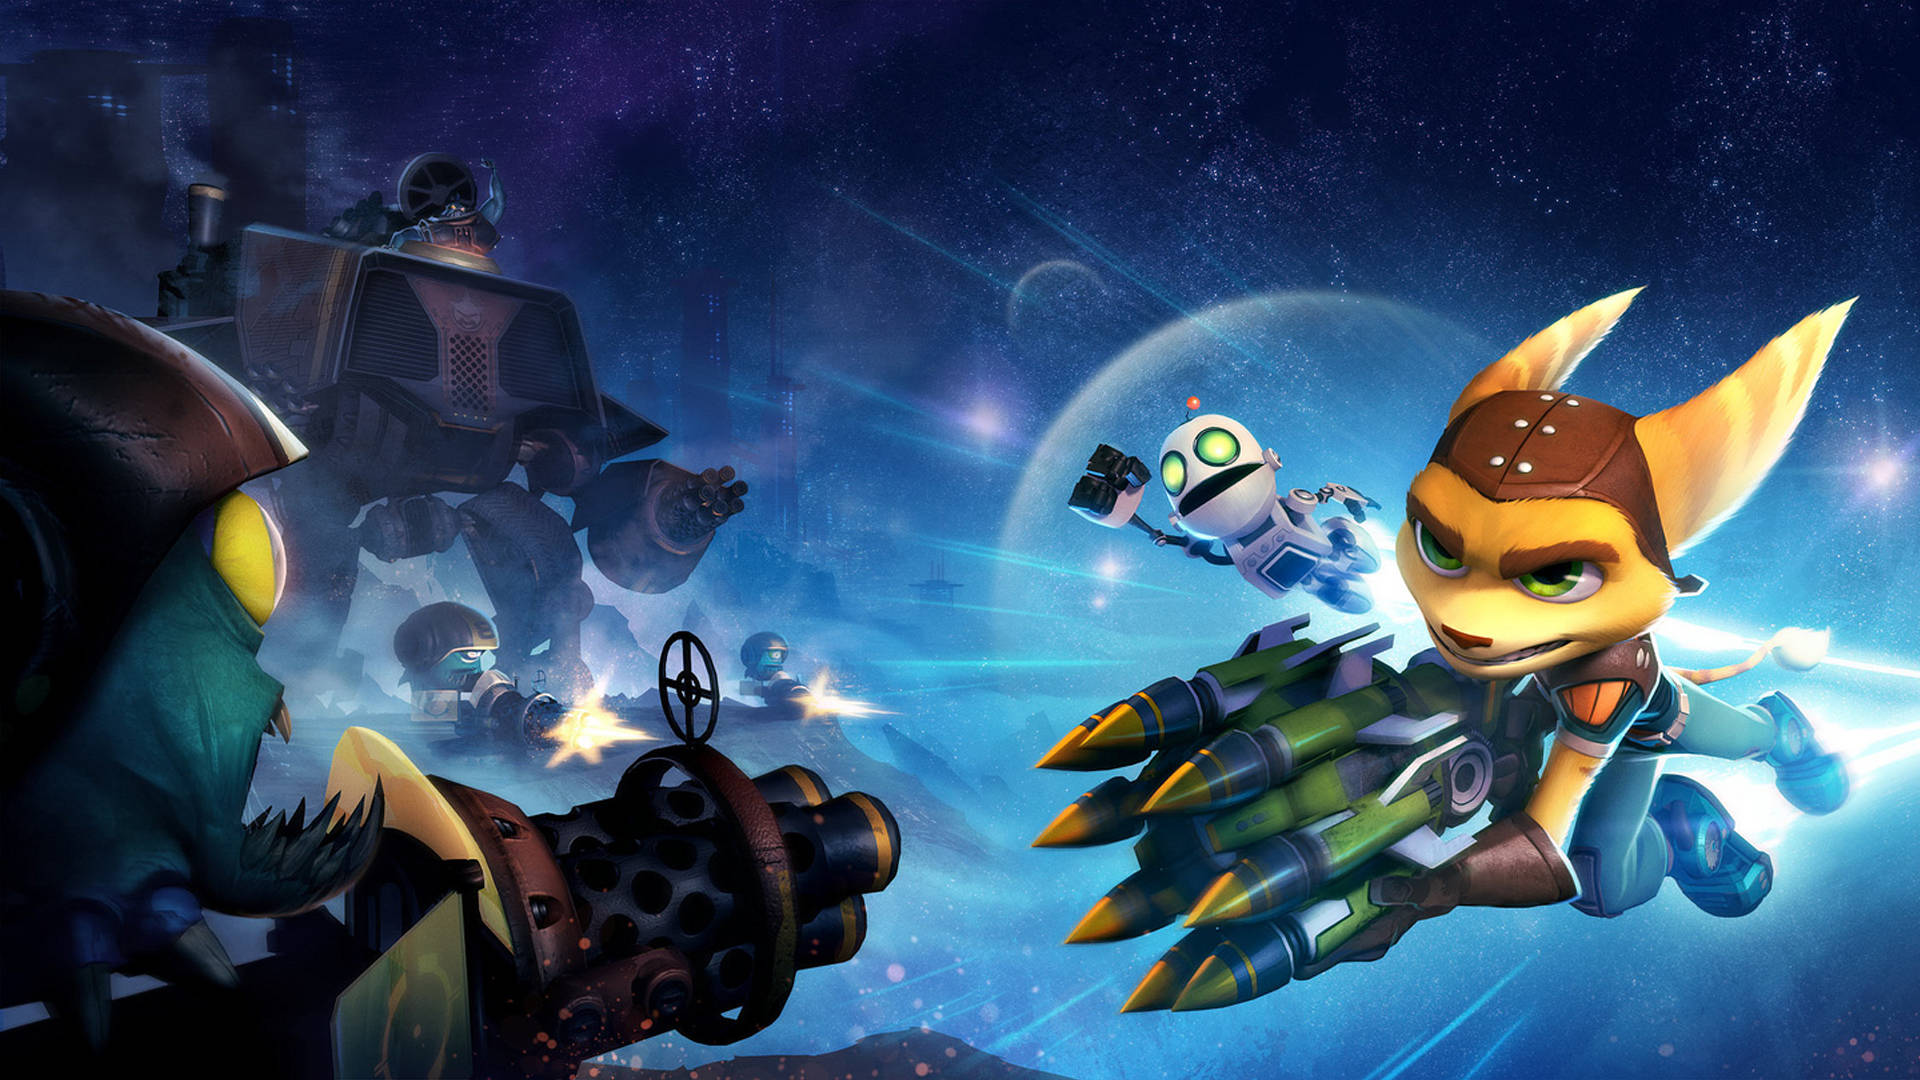 Full Hd Ratchet And Clank Background